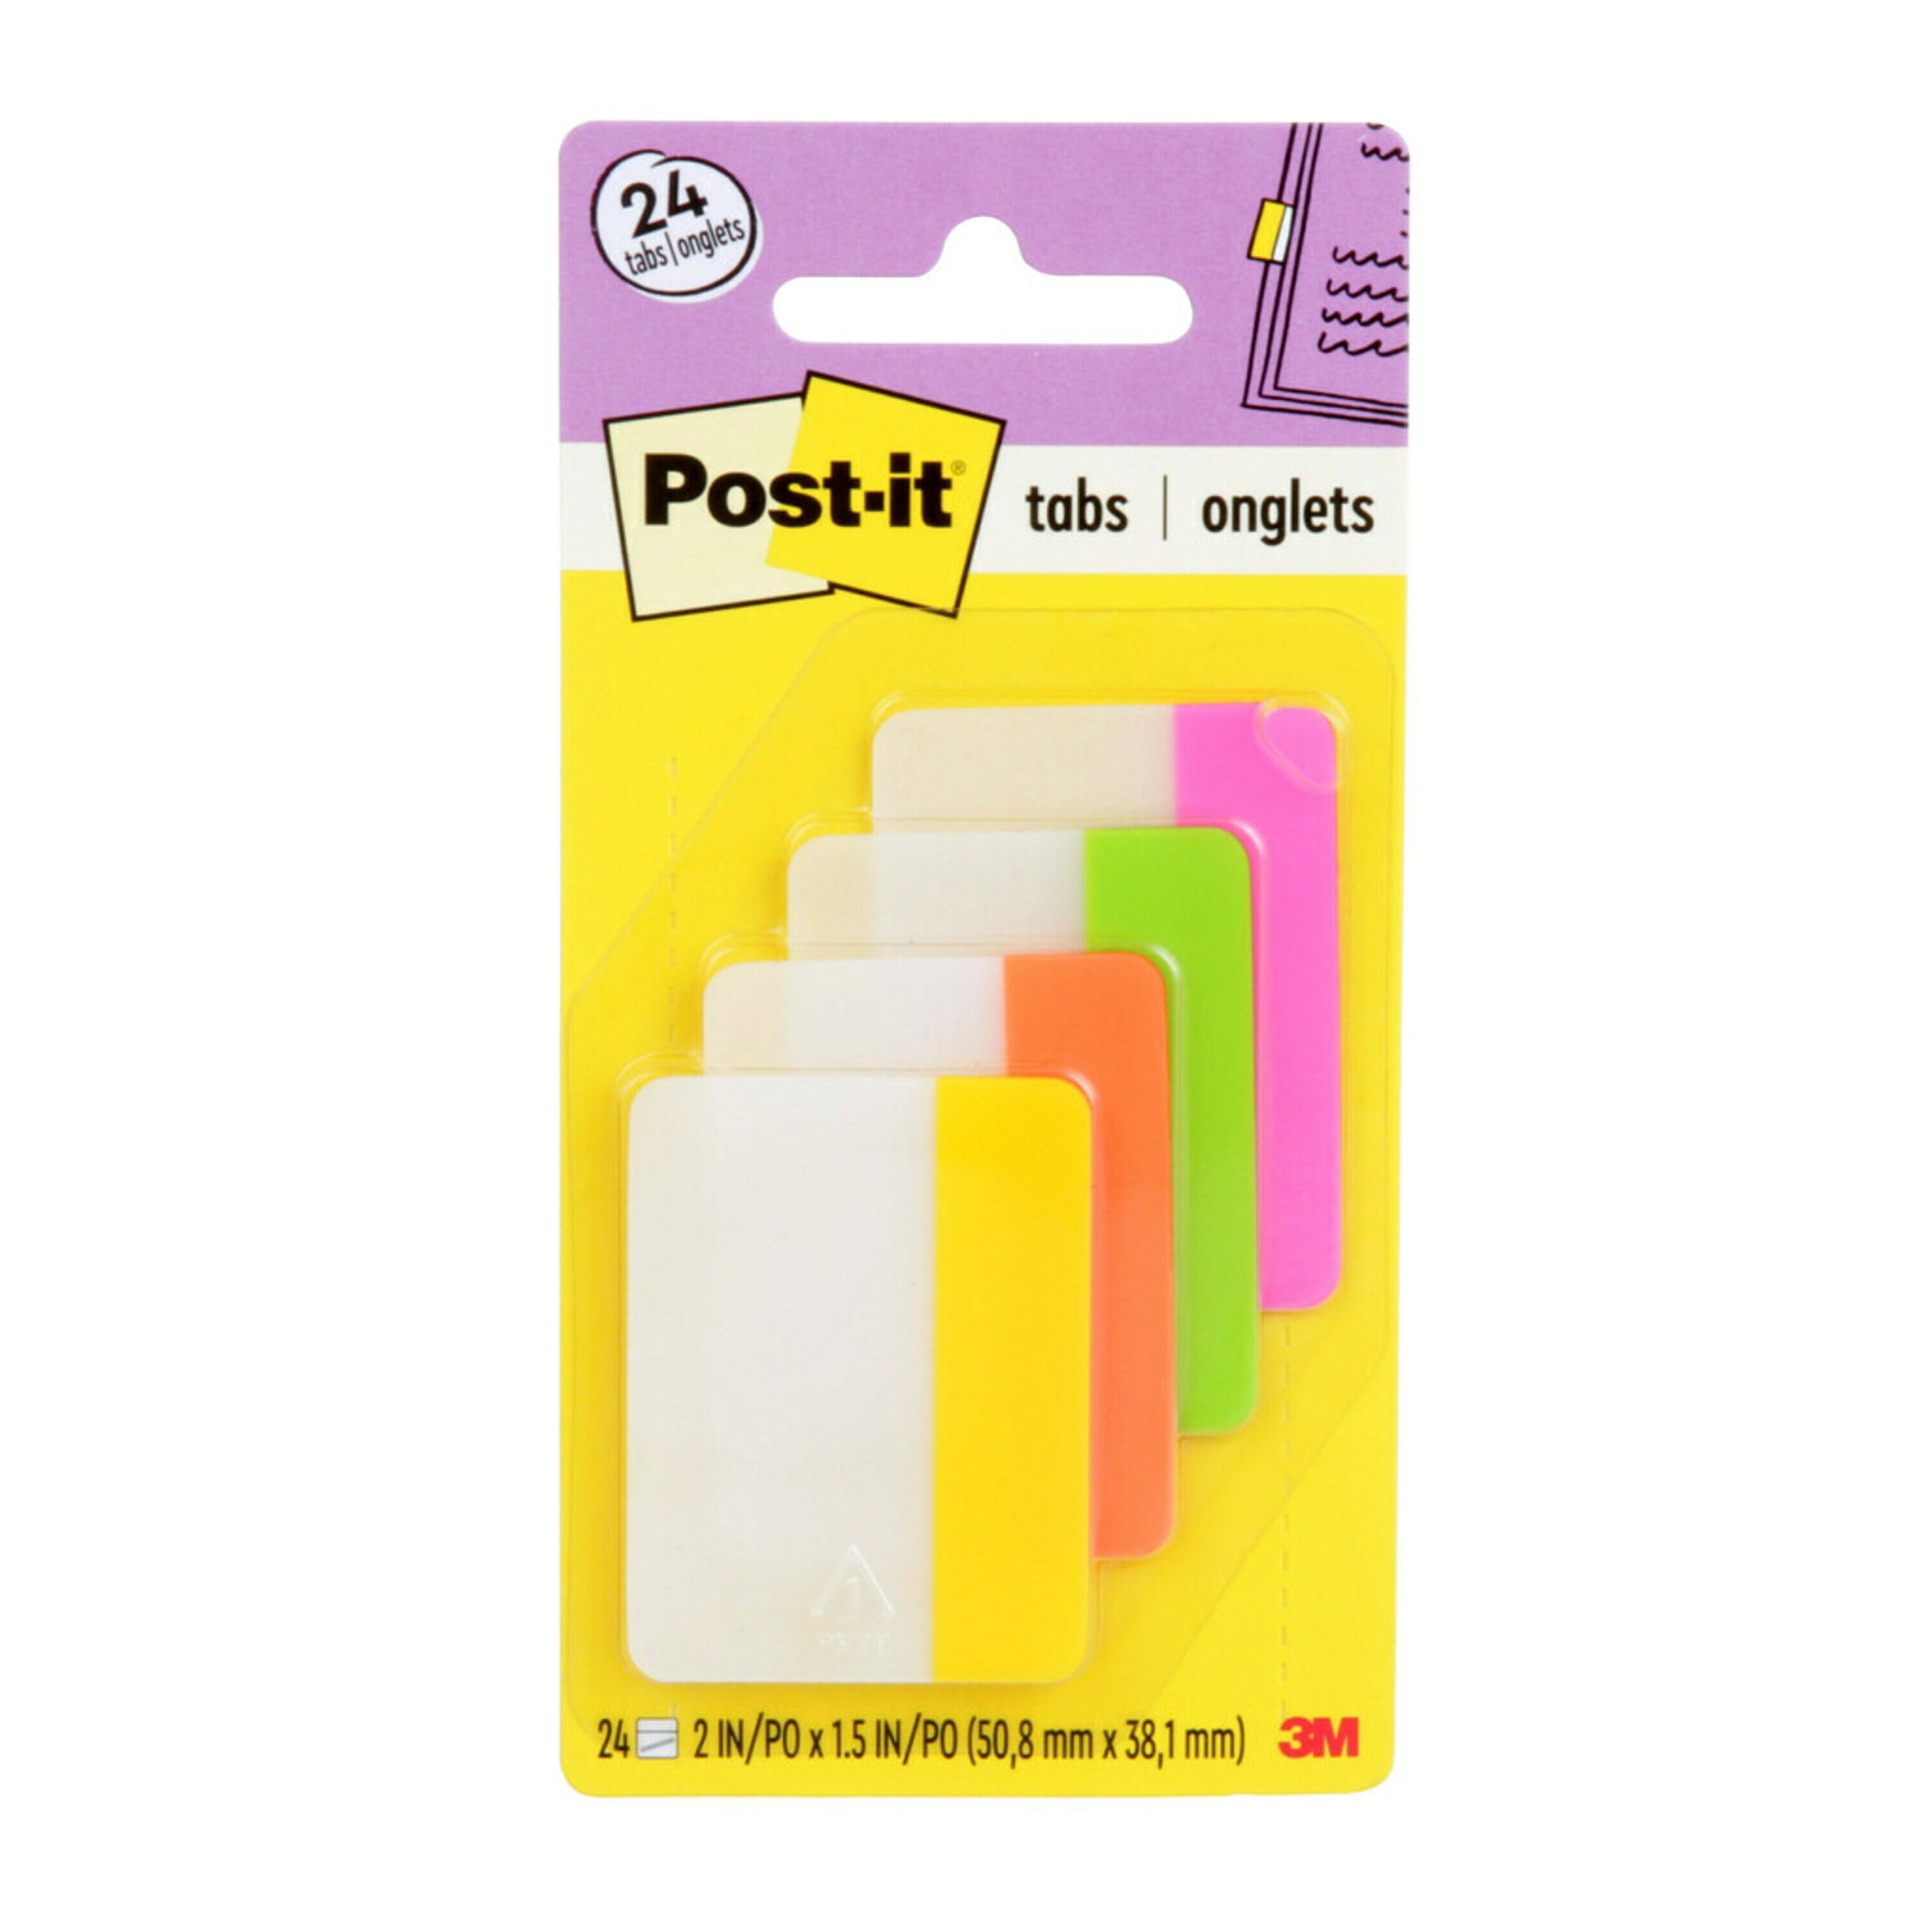 Post-it Super Sticky Notes, Lined, 4 inch x 6 inch, Assorted Greens and Blues, 3 Pads